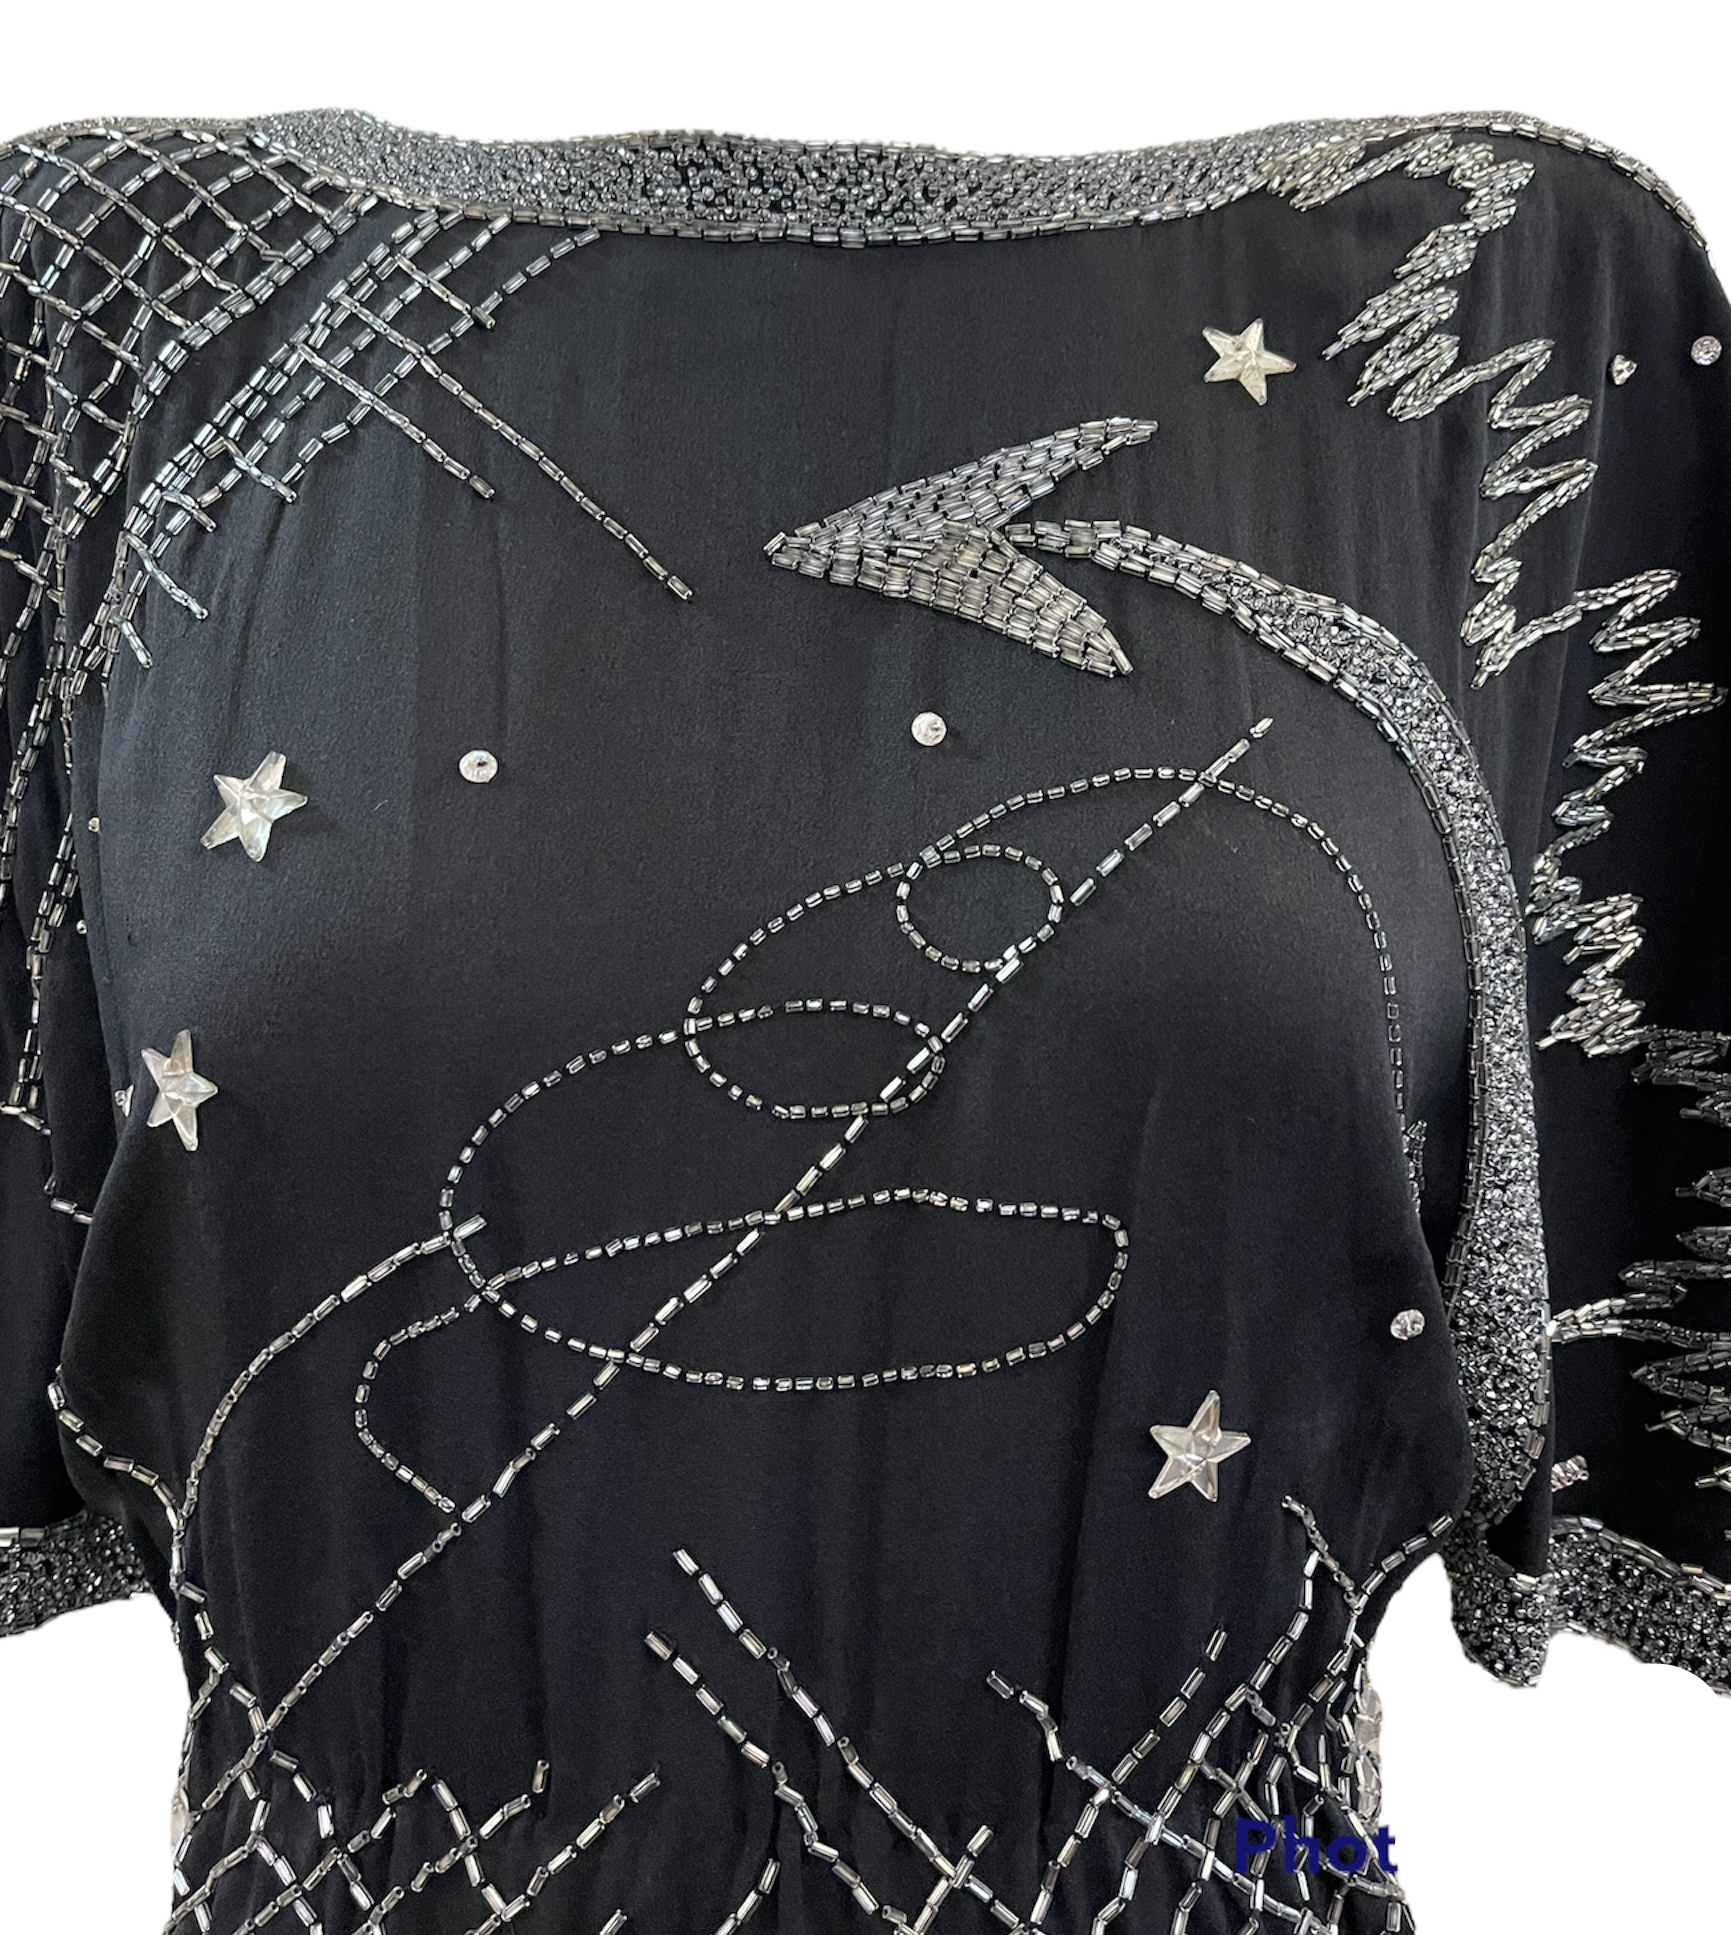 Fabrice 80s Black Beaded Cocktail Dress with Stars DETAIL 4 of 7